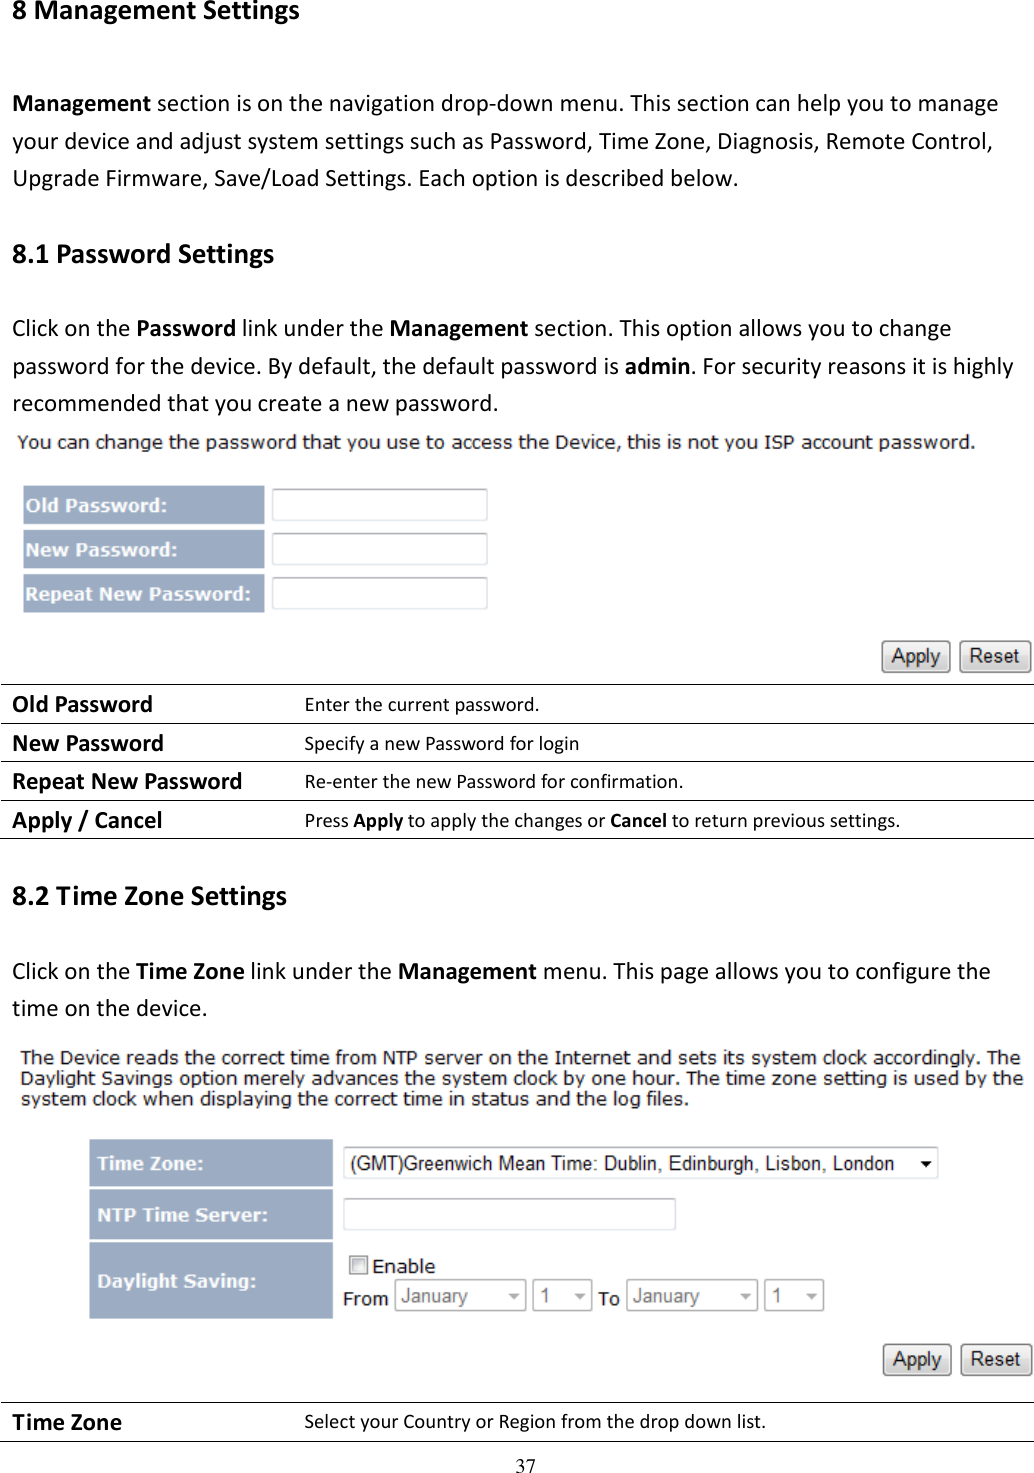 37 8 Management Settings Management section is on the navigation drop-down menu. This section can help you to manage your device and adjust system settings such as Password, Time Zone, Diagnosis, Remote Control, Upgrade Firmware, Save/Load Settings. Each option is described below. 8.1 Password Settings Click on the Password link under the Management section. This option allows you to change password for the device. By default, the default password is admin. For security reasons it is highly recommended that you create a new password.  Old Password Enter the current password. New Password Specify a new Password for login Repeat New Password Re-enter the new Password for confirmation. Apply / Cancel Press Apply to apply the changes or Cancel to return previous settings. 8.2 Time Zone Settings Click on the Time Zone link under the Management menu. This page allows you to configure the time on the device.  Time Zone Select your Country or Region from the drop down list. 